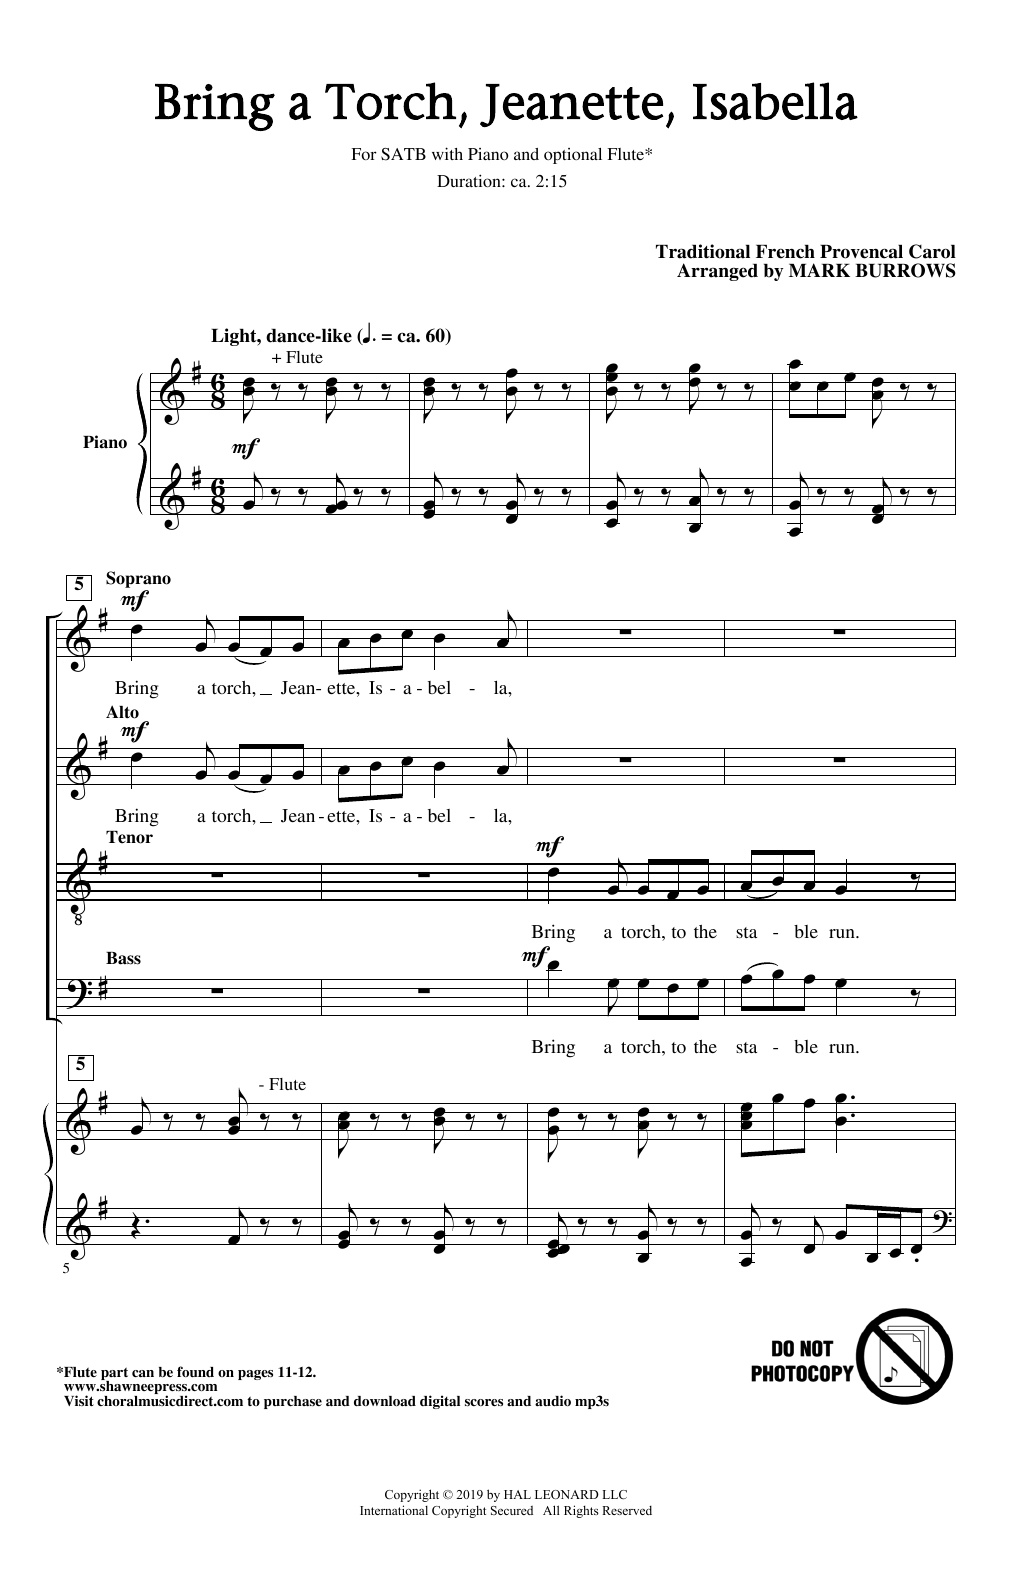 17th Century French Carol Bring A Torch, Jeanette, Isabella (arr. Mark Burrows) sheet music notes and chords. Download Printable PDF.